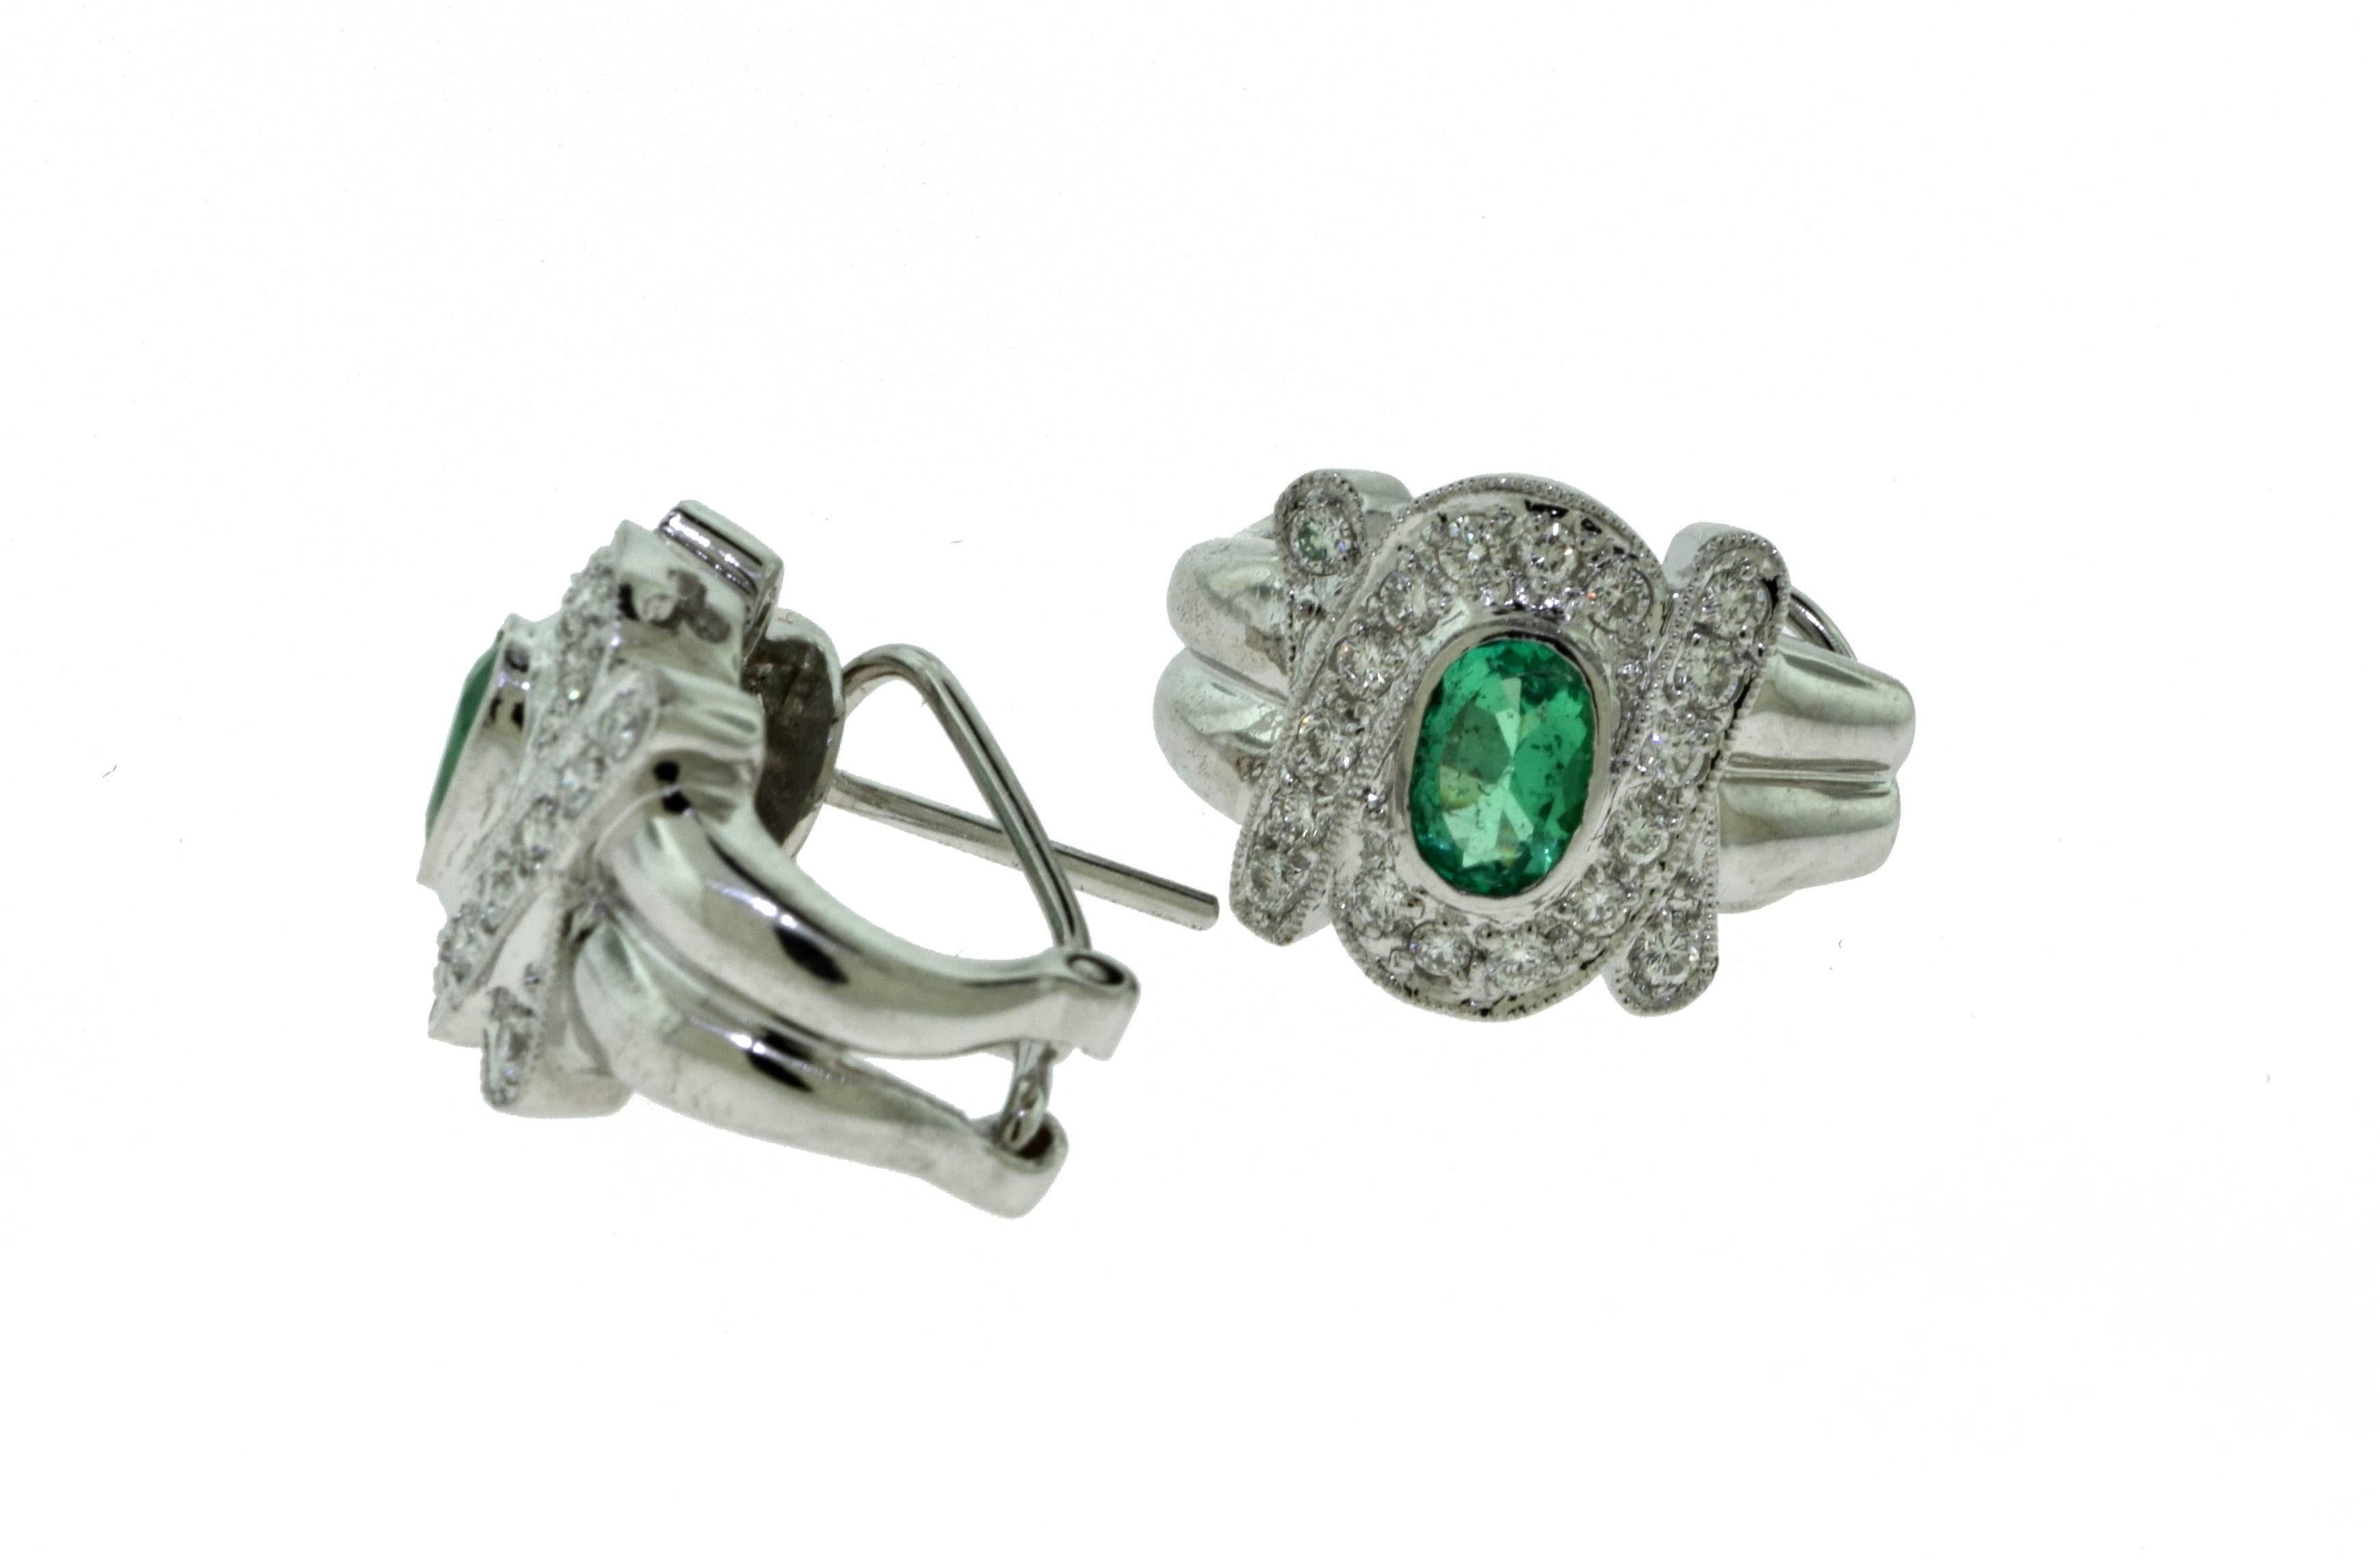 Metal: White Gold
Metal Purity: 18k
Stones: 2 Oval Colombian Emeralds, 36 Round Brilliant Cut Diamonds (18 each earring)
Emerald Carat Weight: 1.60 carat (0.8 ct each earring)
Diamond Carat Weight: 1.20 carat (0.6 ct each earring)
Diamond Color: H -